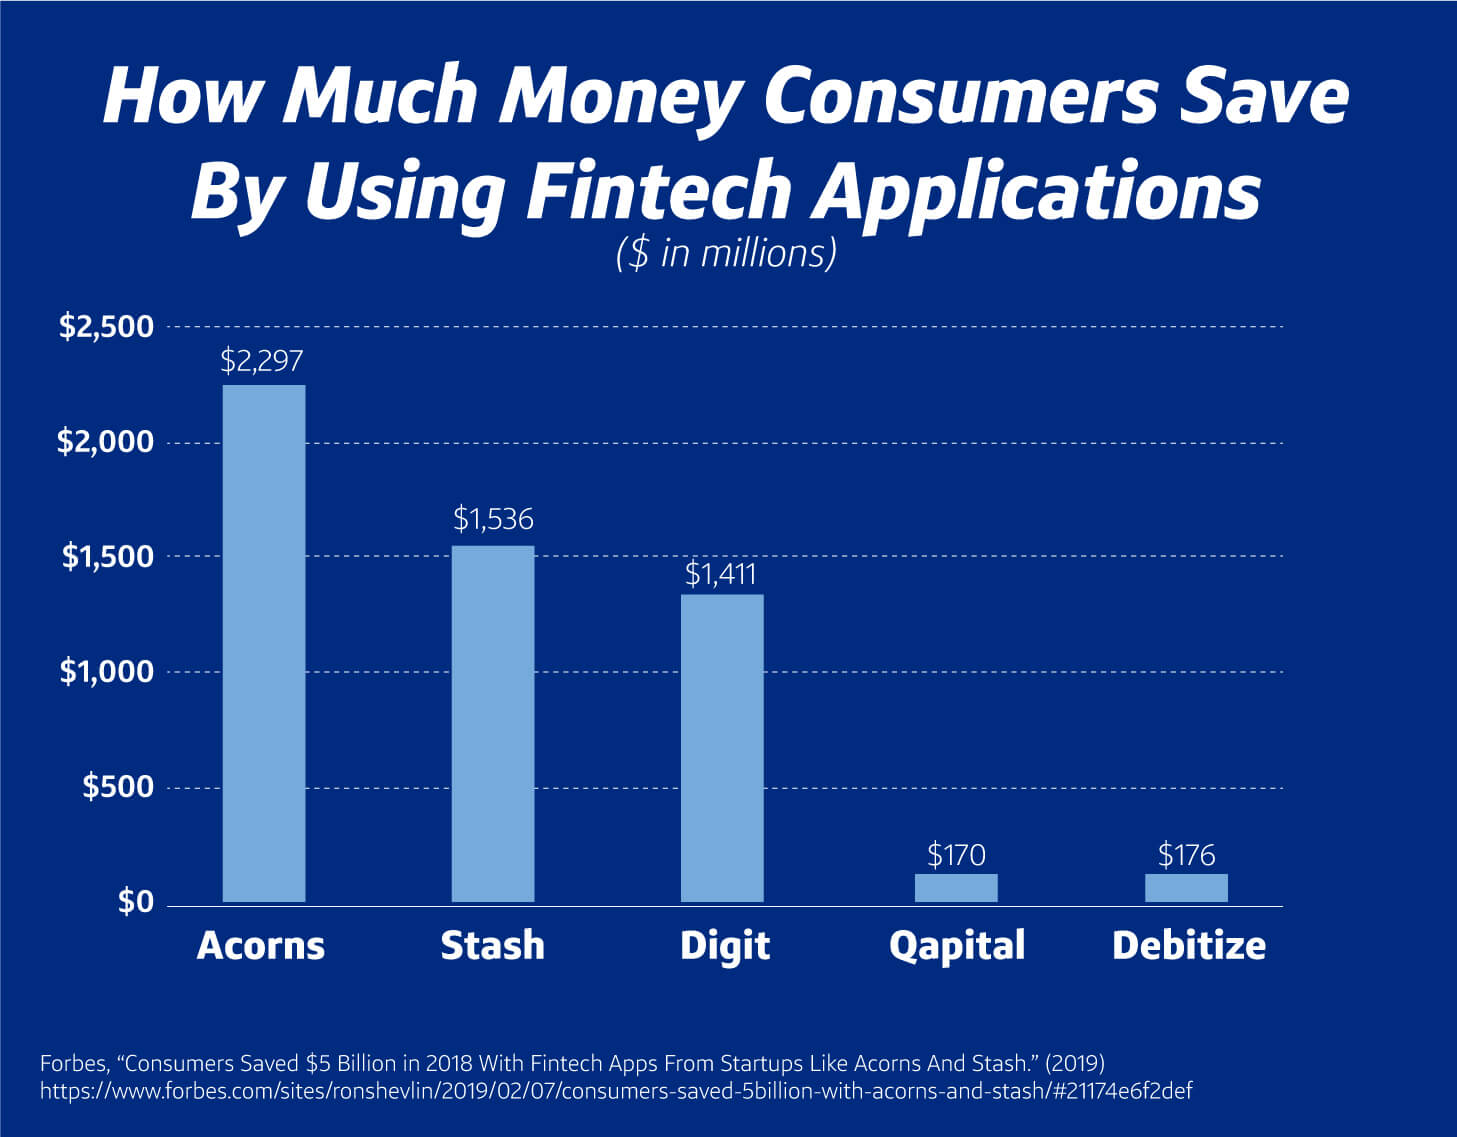 How much money consumers save by using fintech applications